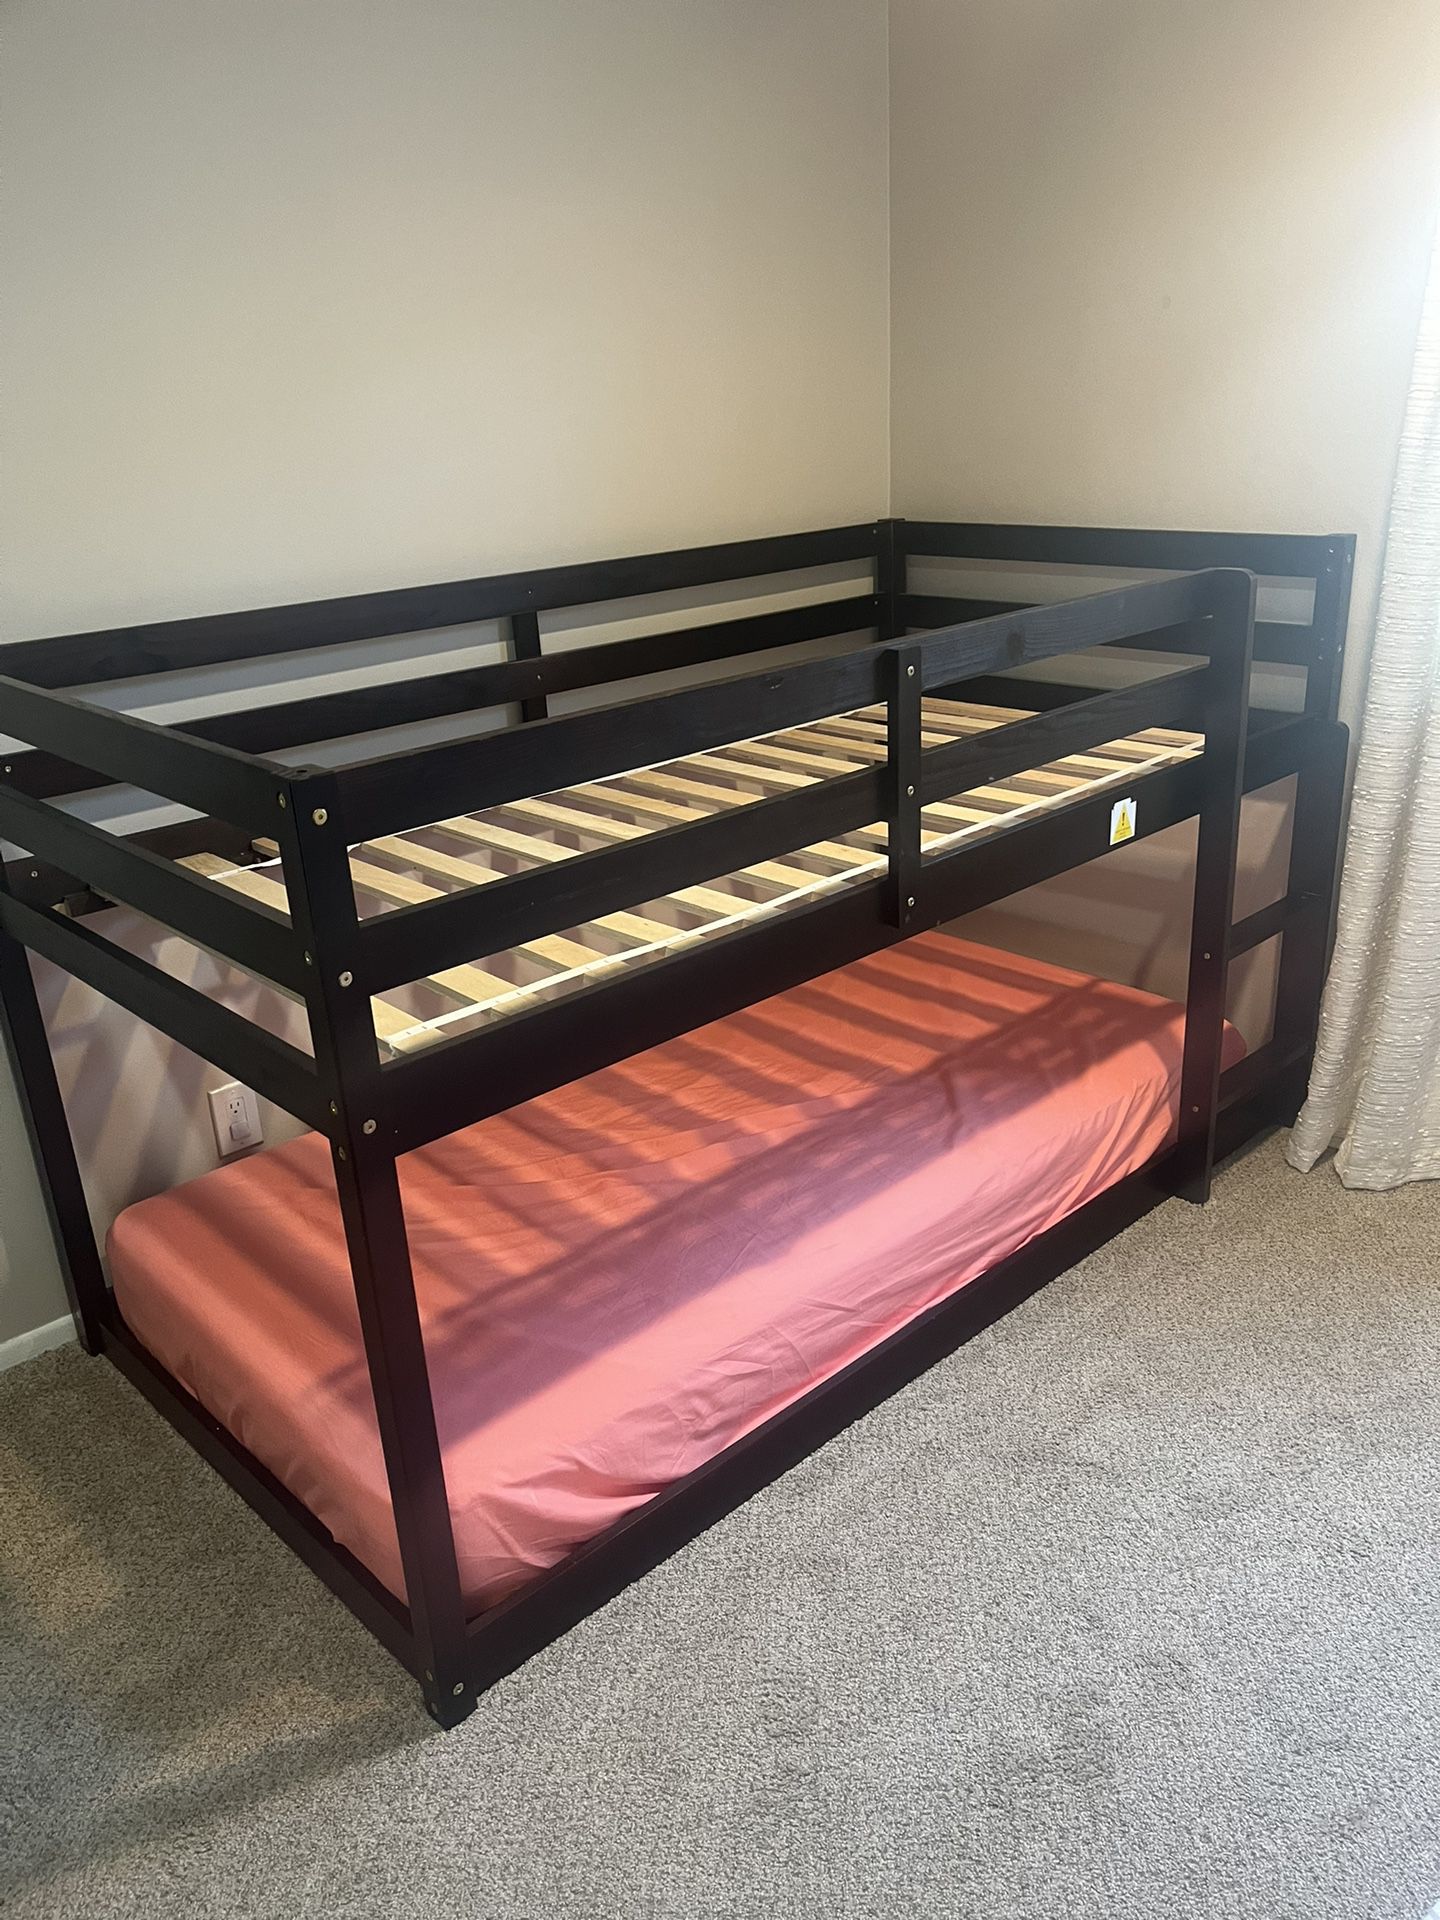 Low Rise Bunk Beds